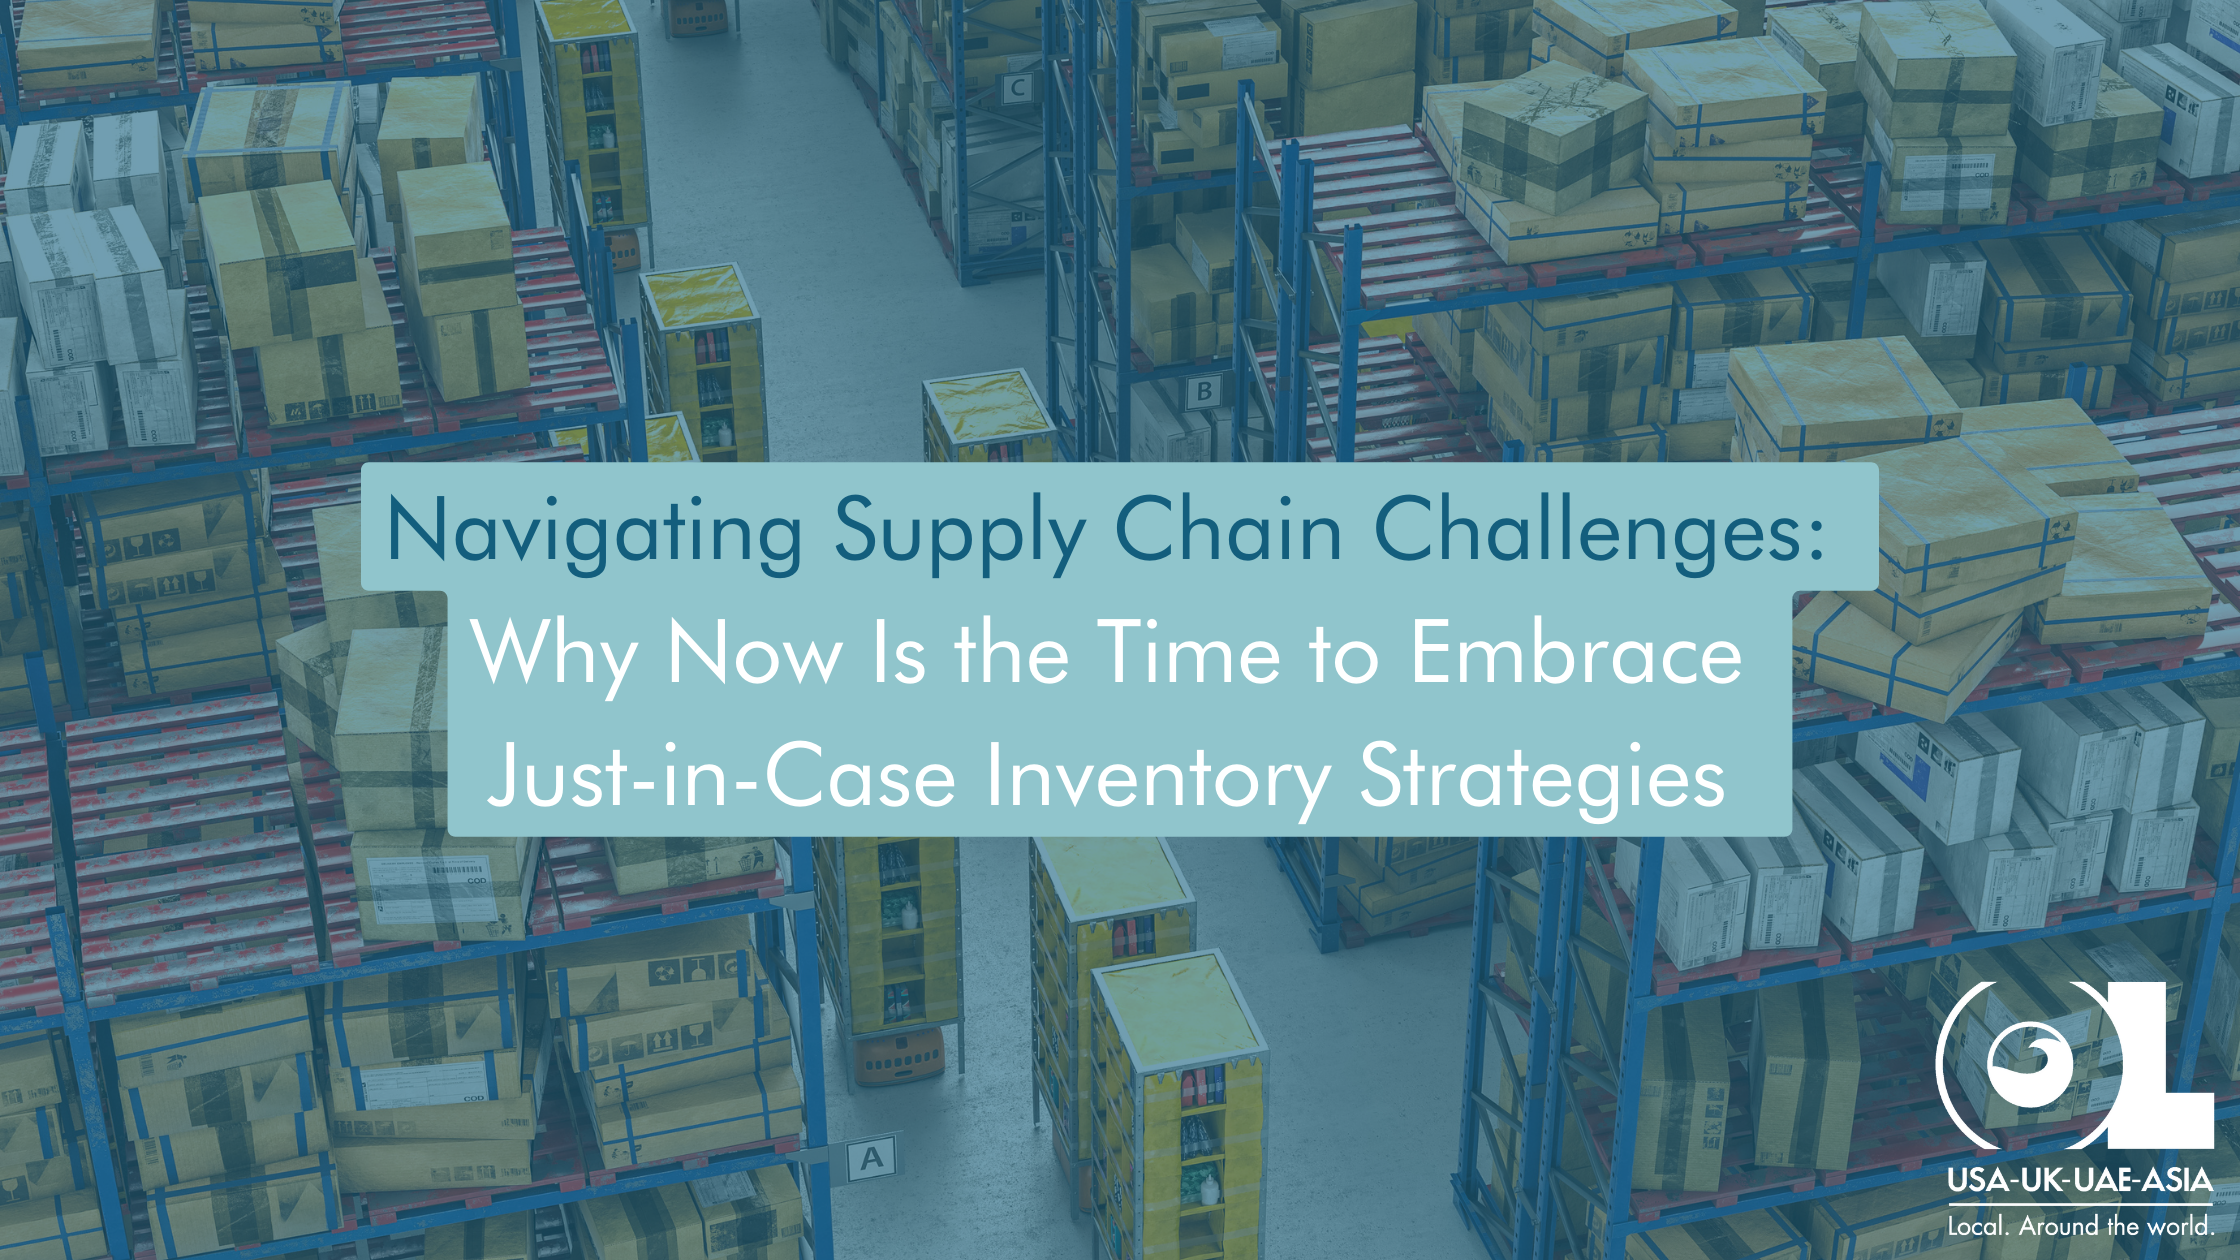 Navigating-Supply-Chain-Challenges-Why-Now-Is-the-Time-to-Embrace-Just-in-Case-Inventory-Strategies-ol-usa